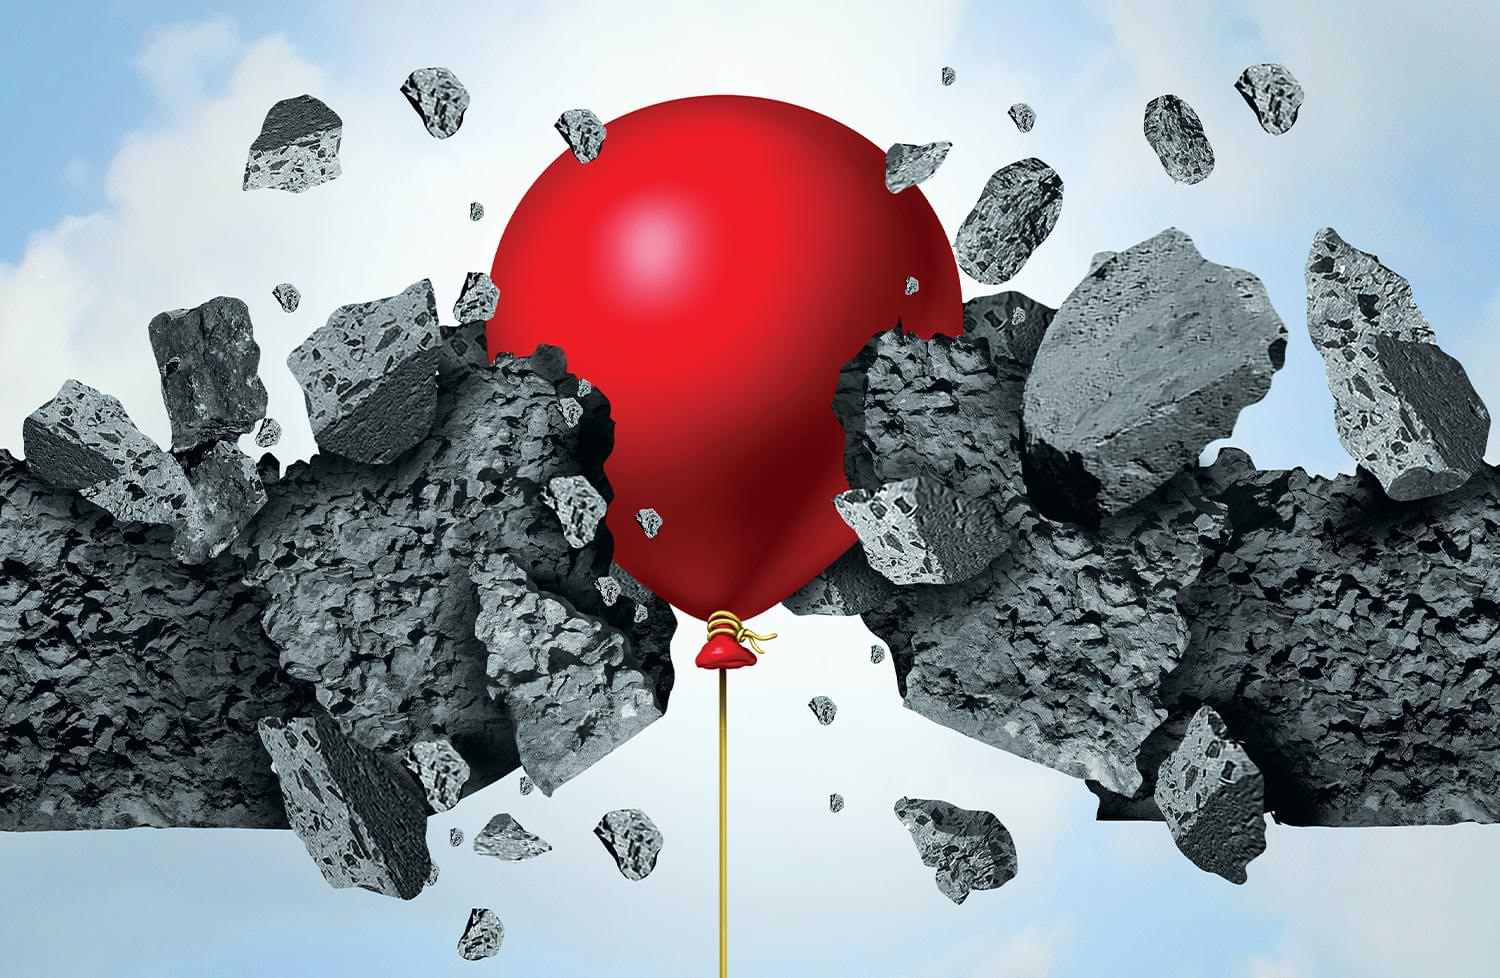 a bright red balloon floating up, breaking through a concrete